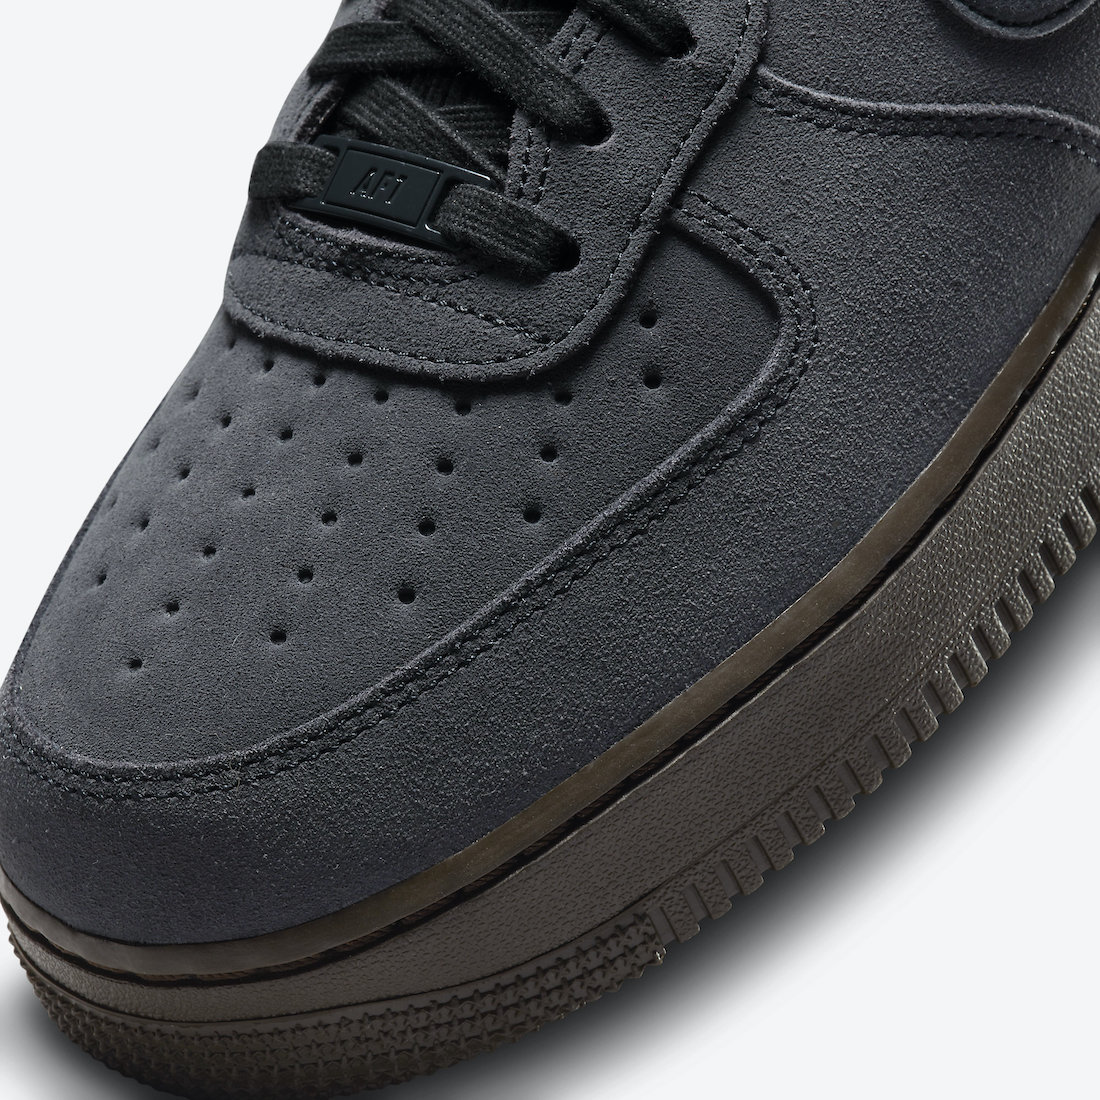 Nike Air Force 1 Low Off-Noir DO6730-001 Release Date